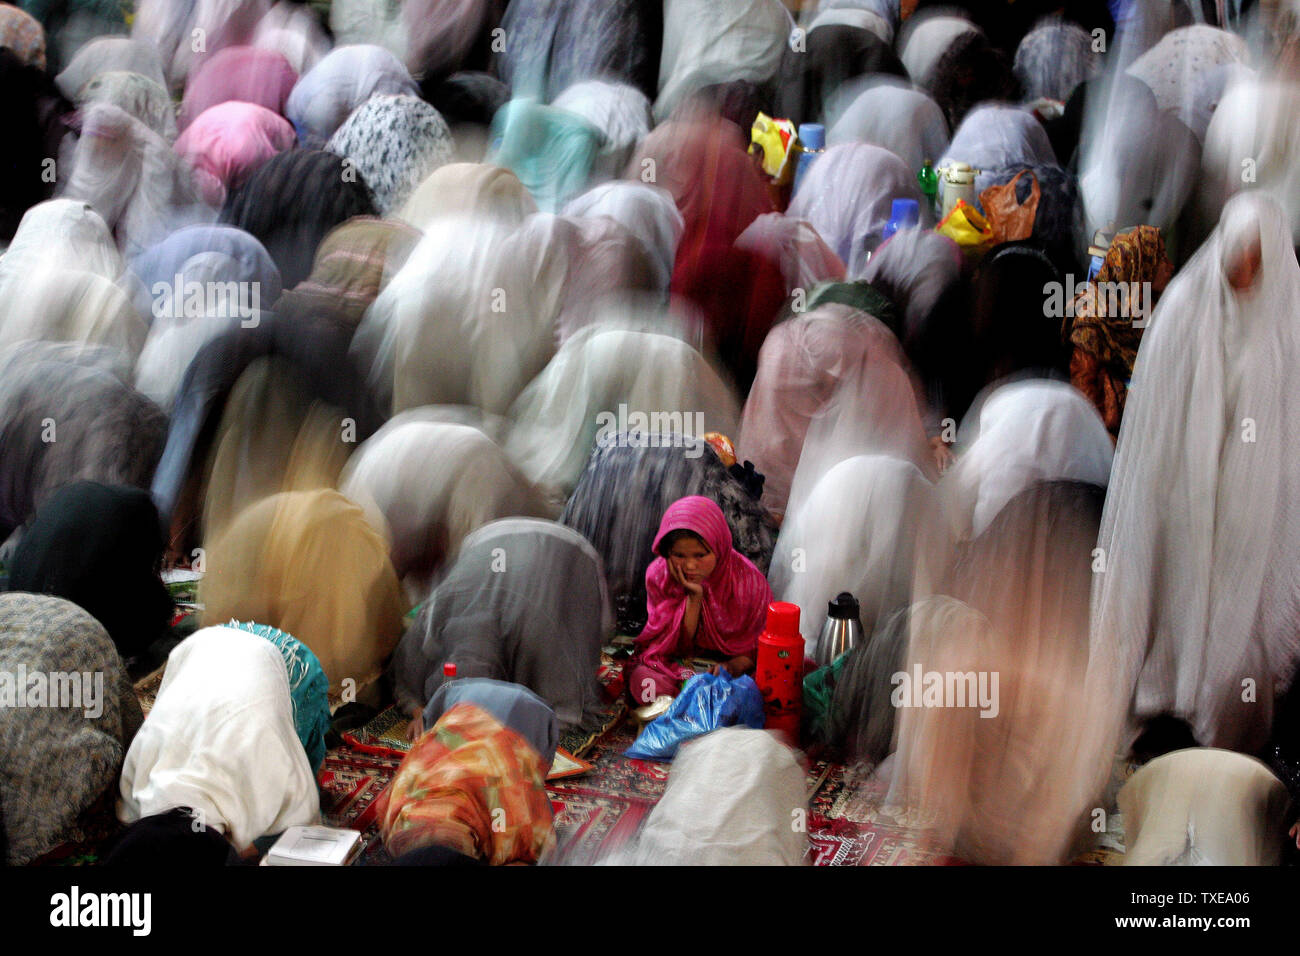 A girl looks on while other women pray during the Lailat al-Qadr (Night of Power) ceremonies which celebrate the night in which the holy Koran was first revealed to the Prophet Mohammed through the angel Gabriel in a mosque in Kabul, Afghanistan on September 10, 2009. Observant Muslims pray all night long for mercy and salvation in a ritual known locally as 'Ehyaa' or 'Revival', one of the most important ceremonies of the holy month of Ramadan.  UPI/Mohammad Kheirkhah Stock Photo